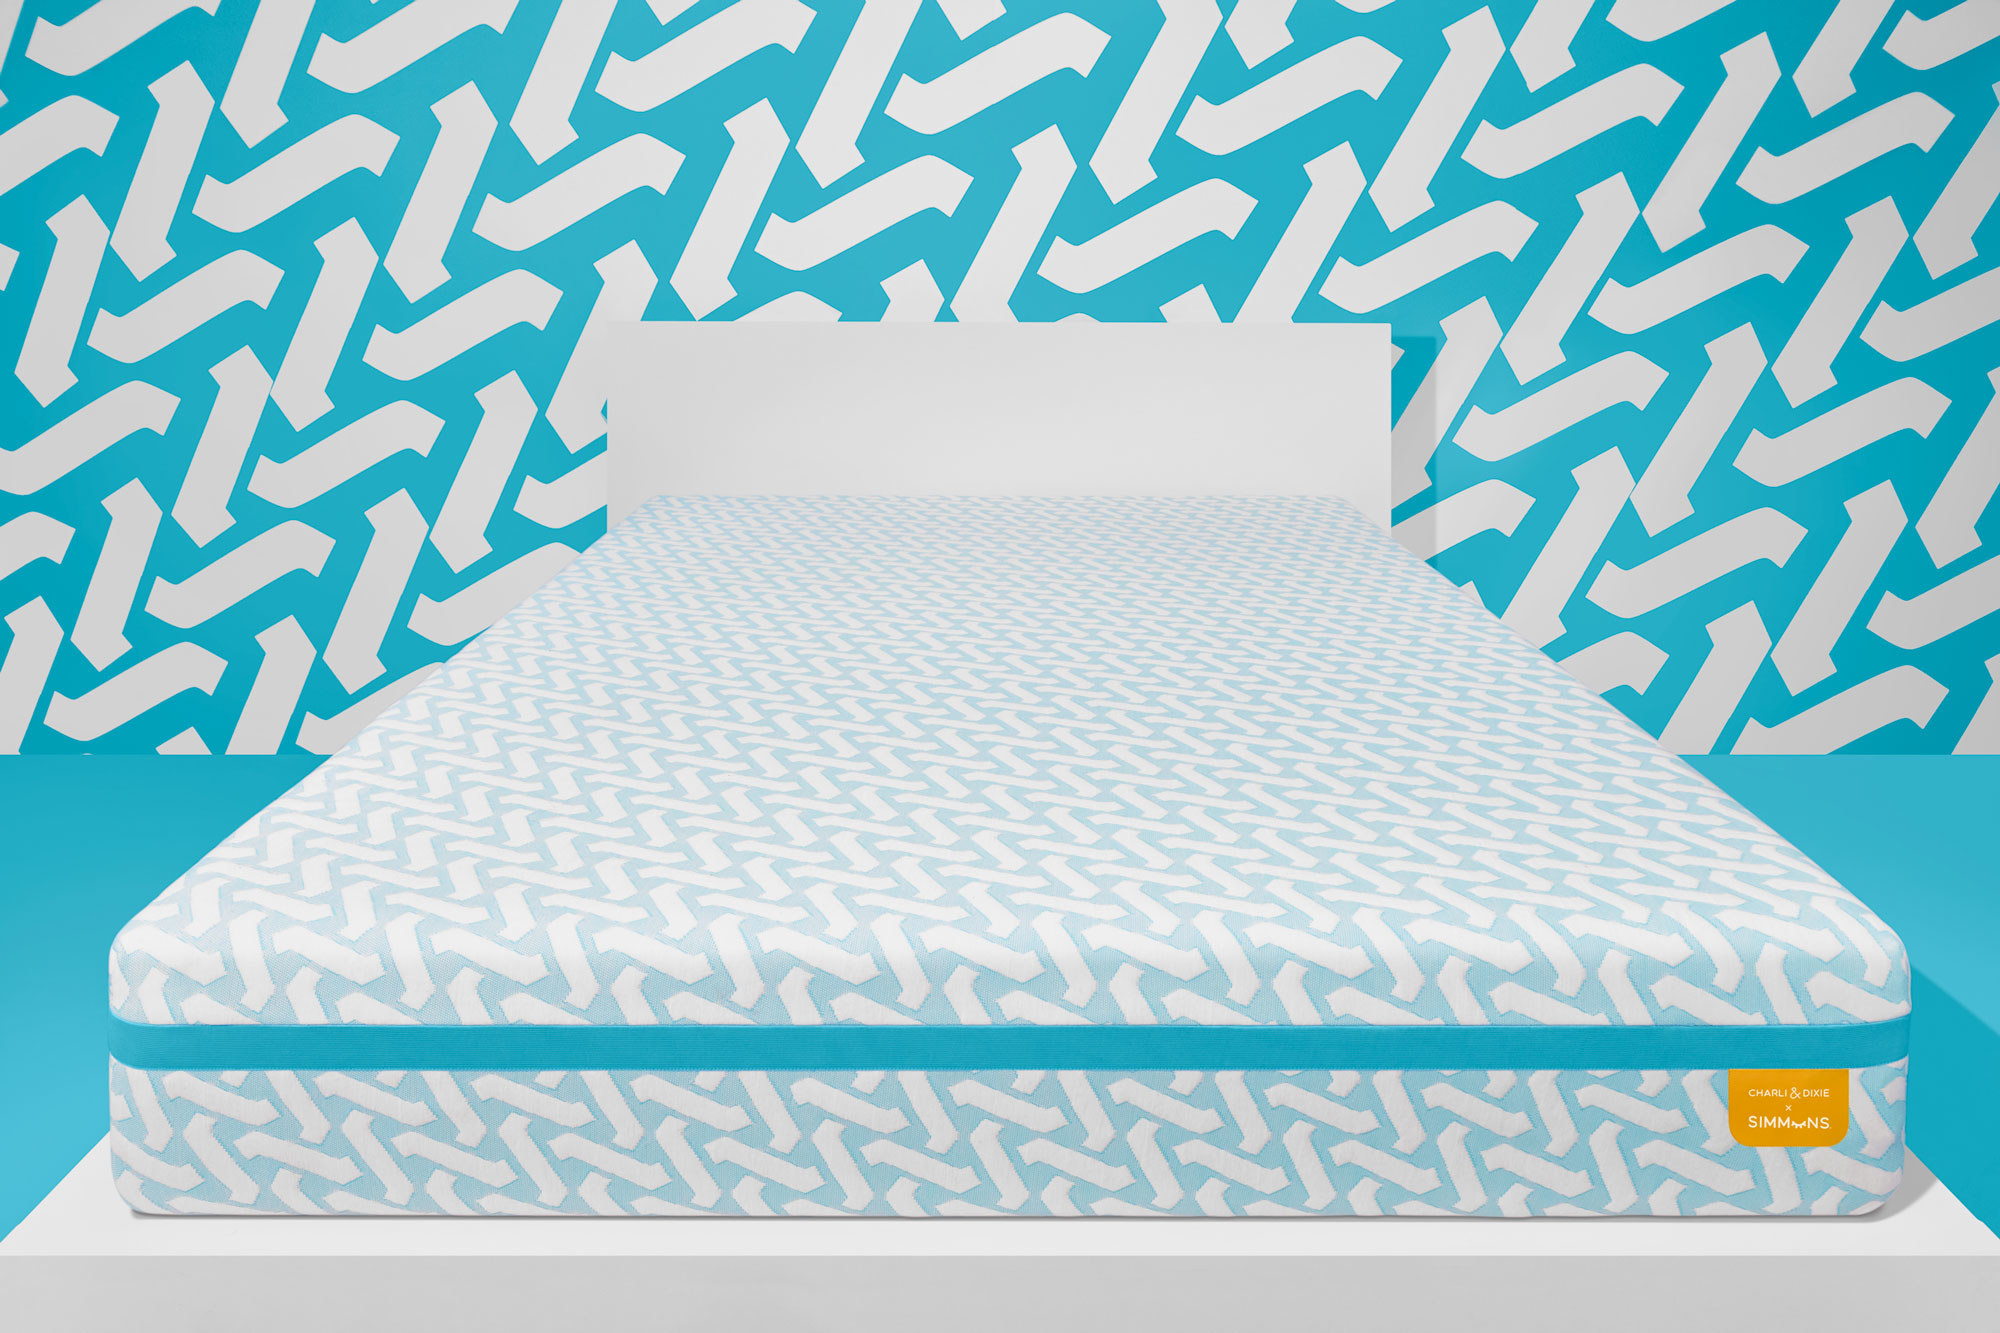 A blue and white Simmons mattress against a blue and white patterned wall.